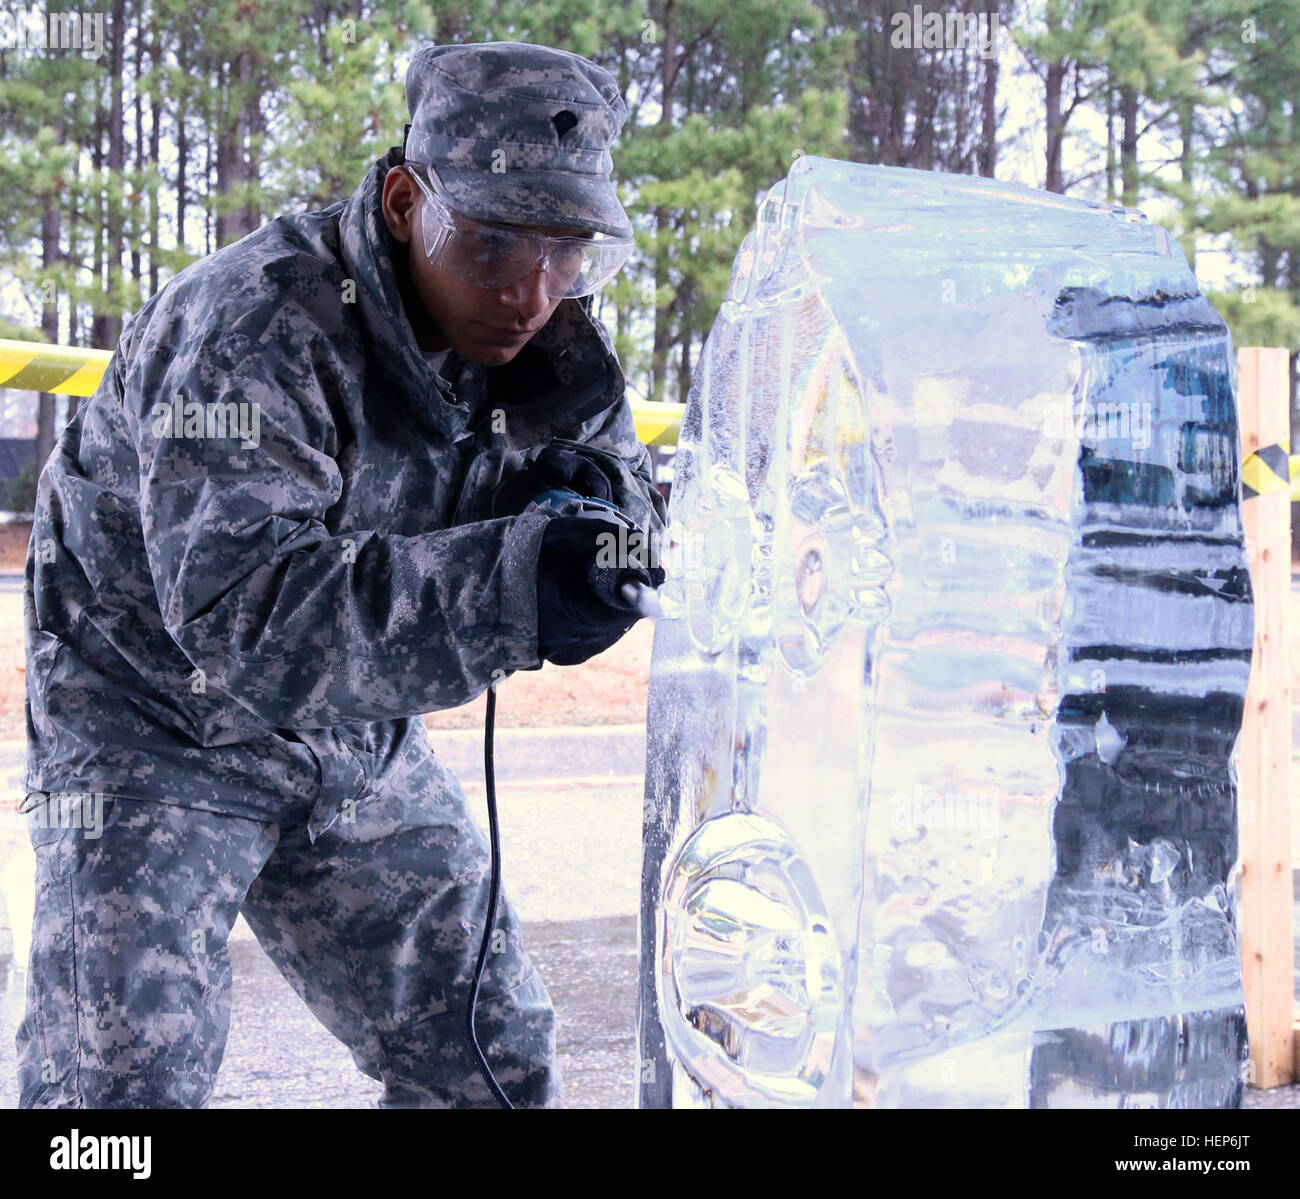 Specialist Nathanael Dewey, a cook assigned the 103rd Sustainment Command (Expeditionary), carves out the eye on his ice sculpture of a minion during the 40th Annual Military Culinary Arts Competitive Training Event at Fort Lee, Va., March 11. Dewey and his teammate, Staff Sgt. Markos Mendoza, a cook assigned to the 257th Transportation Company, represented the Army Reserve in the ice sculpting competition, and although neither Soldier had previous ice carving experience they managed to earn a bronze medal for their carving of the characters from the 'Minions,' a popular 3-D computer-animated  Stock Photo